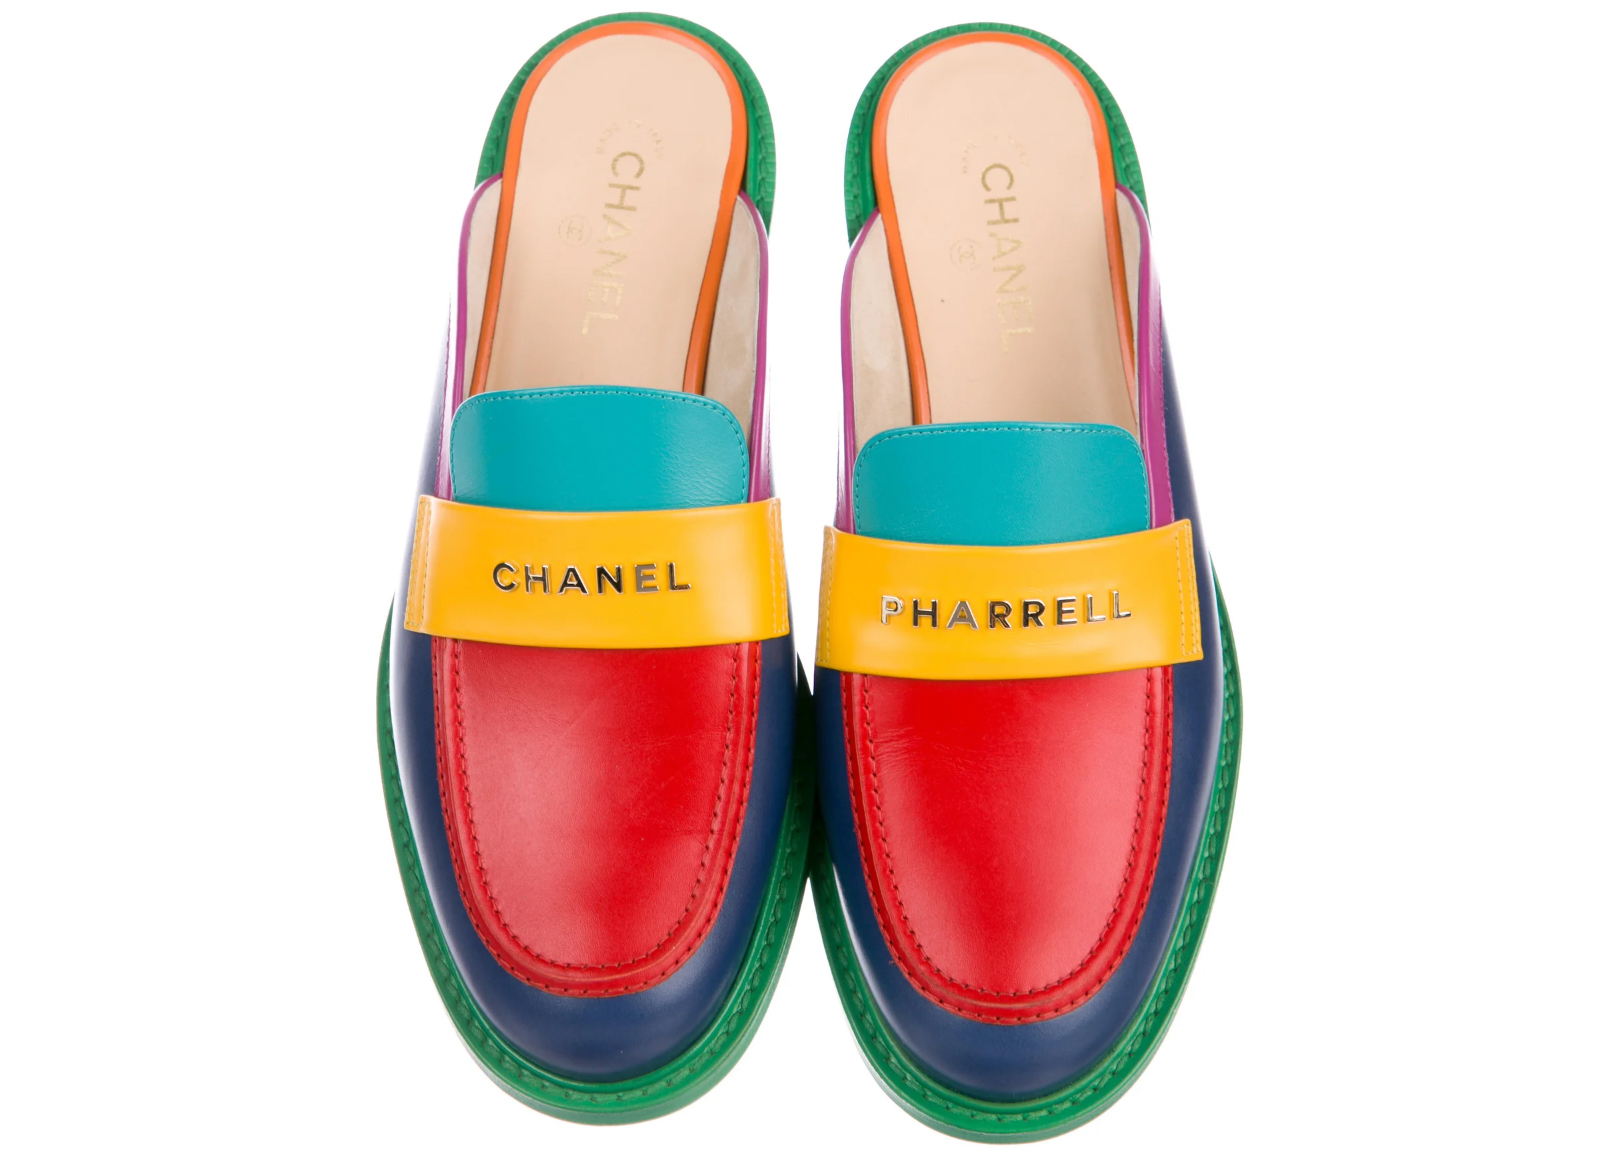 Chanel  Pharrell Williams x Chanel SS19 Capsule Collection Loafers Mules  Mules  Size FR 405 in Italy